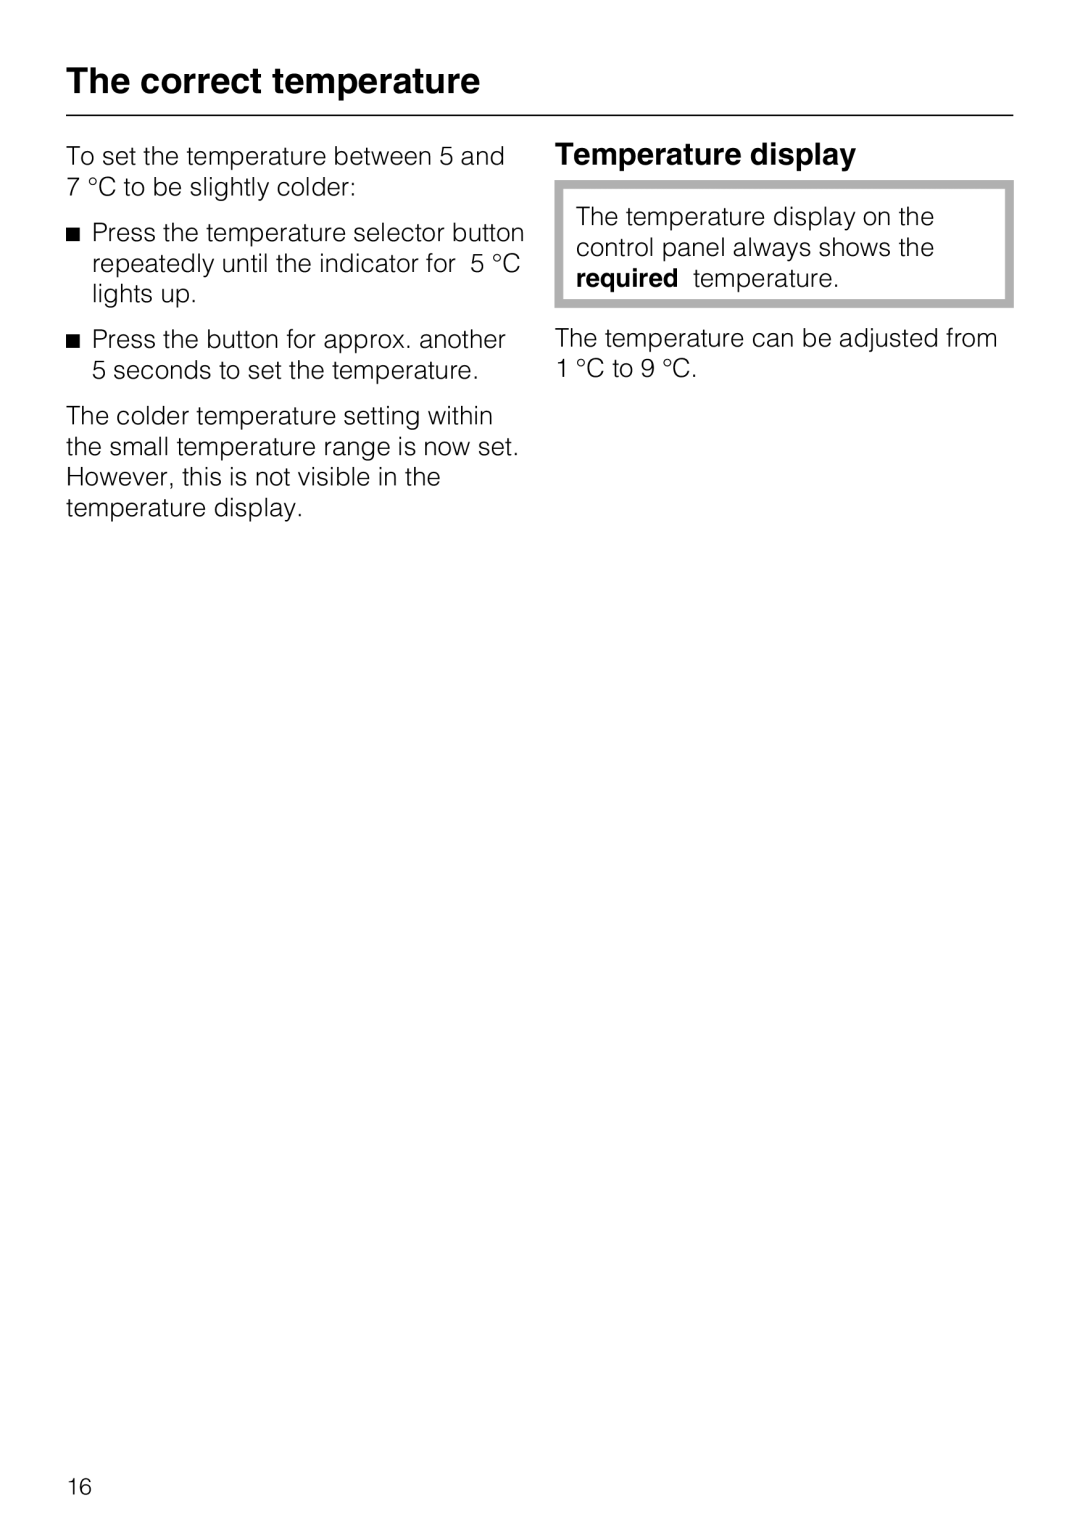 Miele K 12421 SD installation instructions Temperature display, The correct temperature 